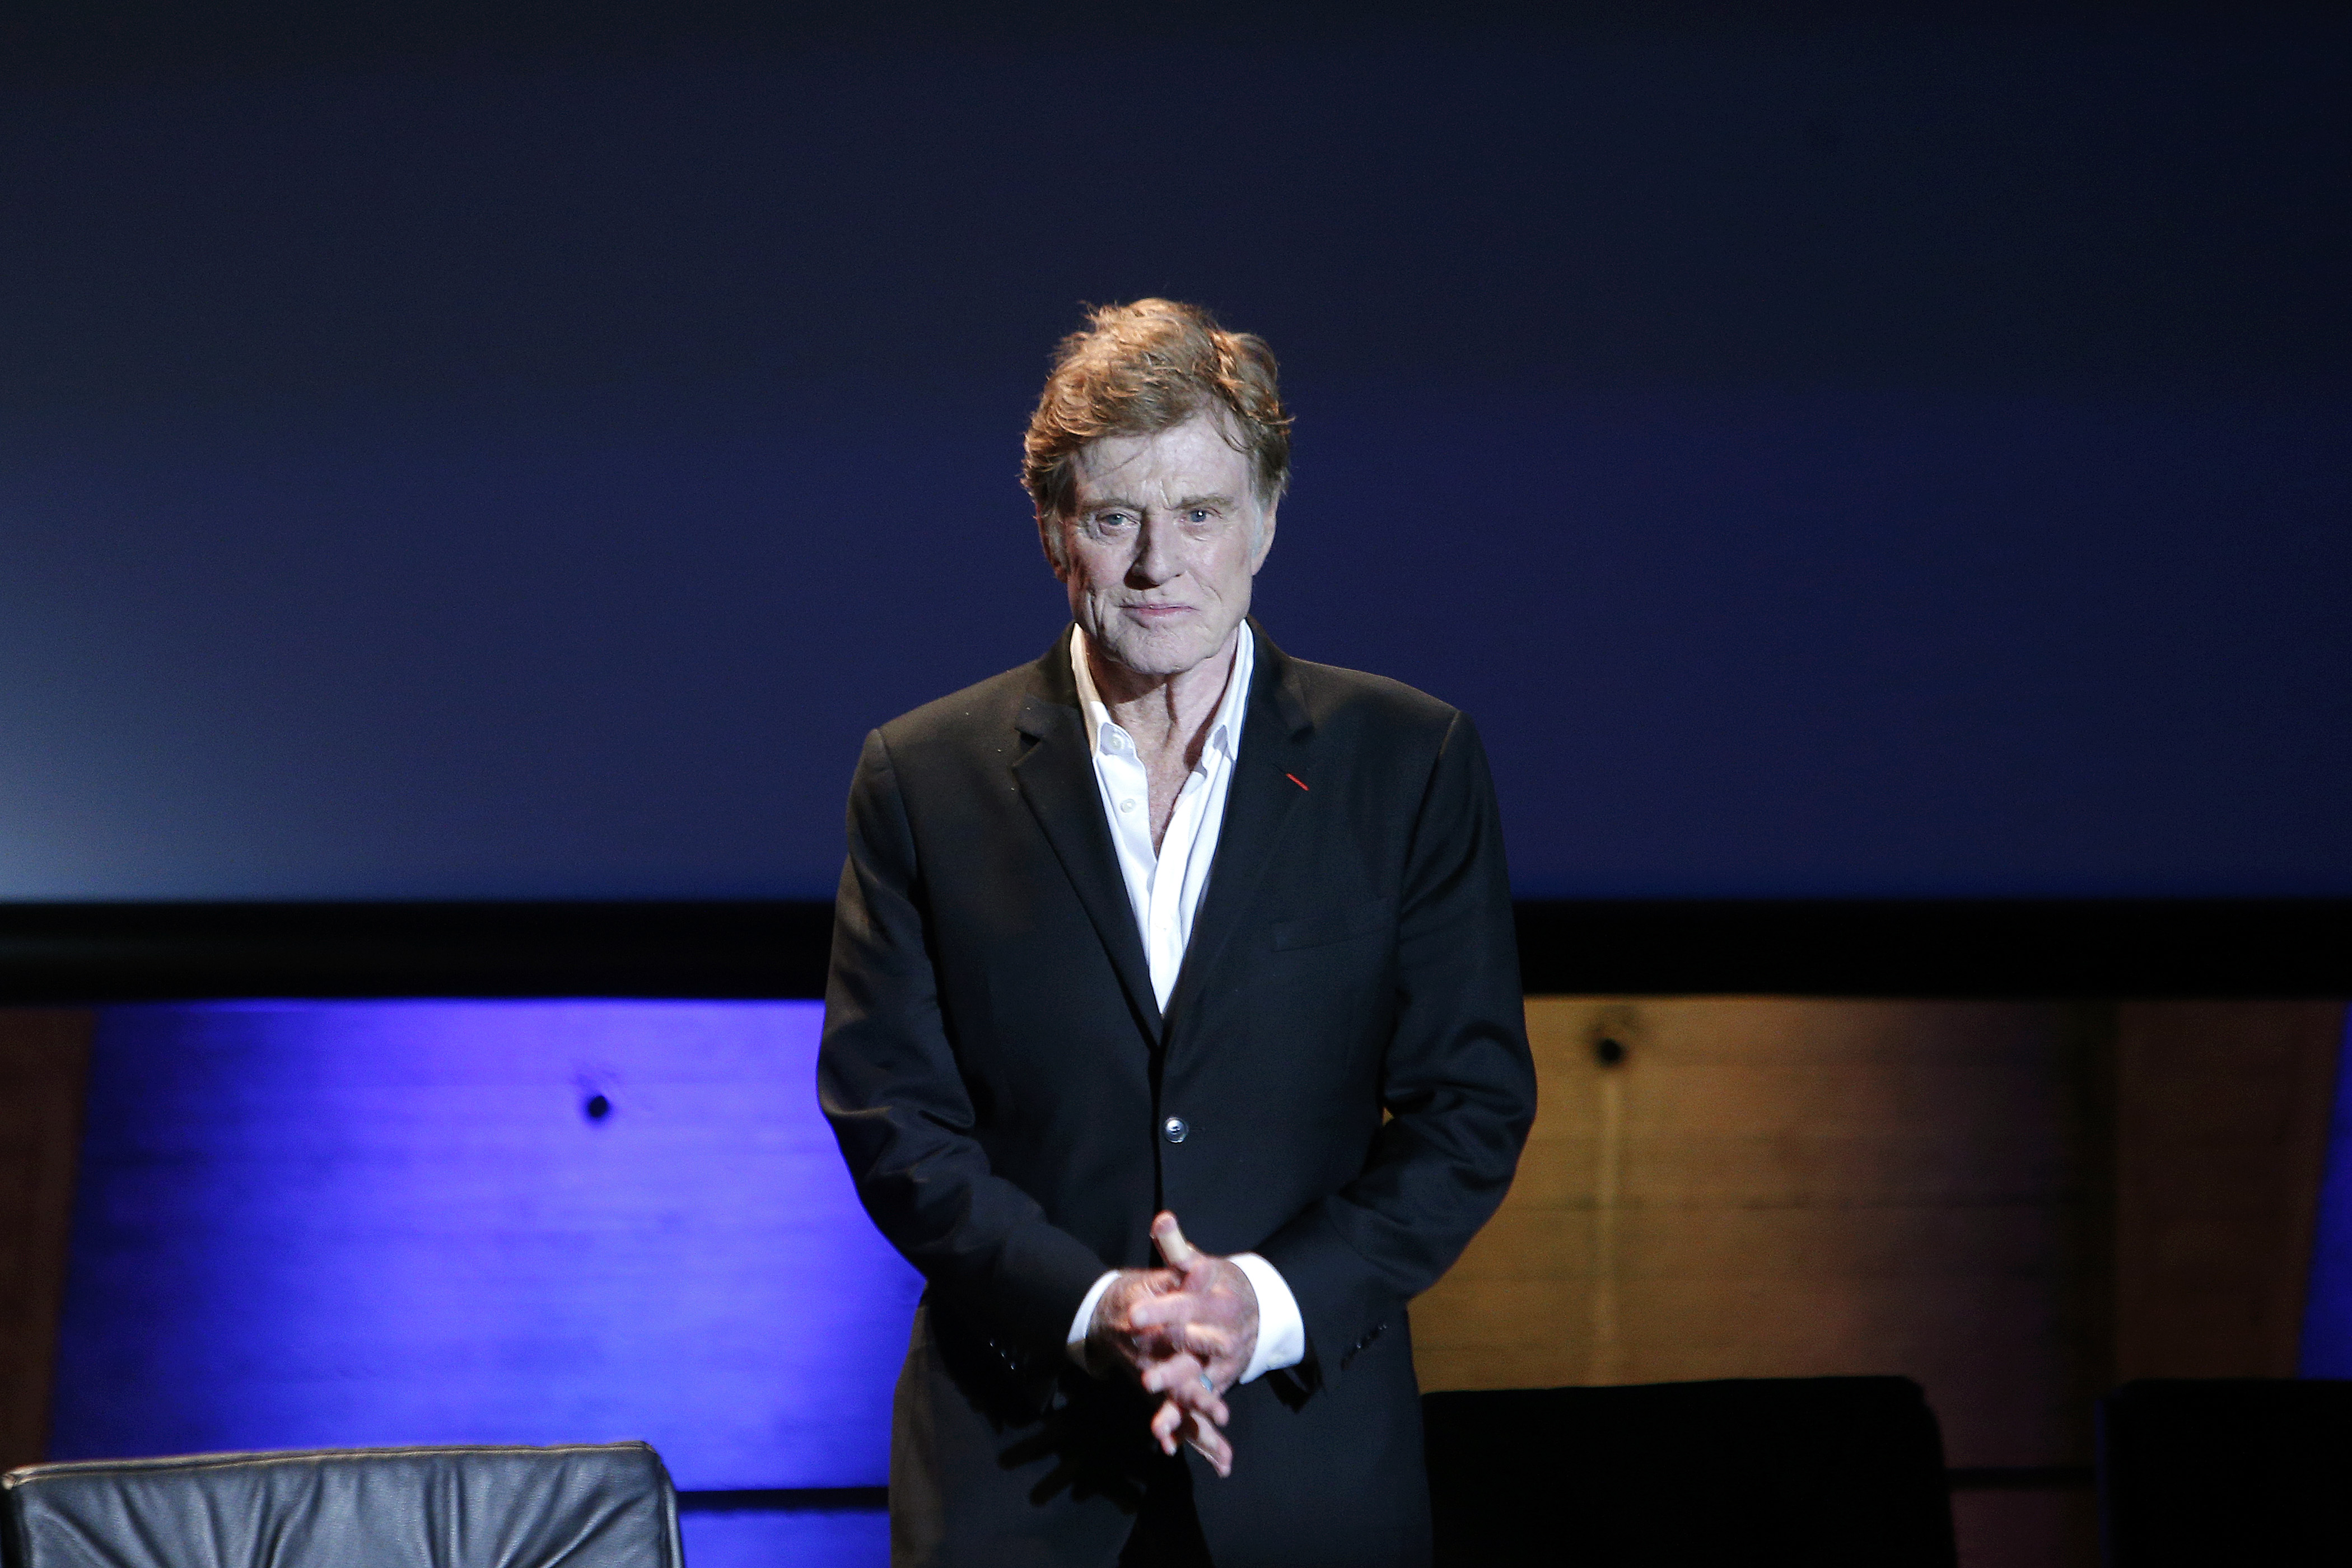 Robert Redford arrives on stage during a conference on climate at the UNESCO headquarters in Paris on Dec. 6, 2015. (Thibault Camus—AP)